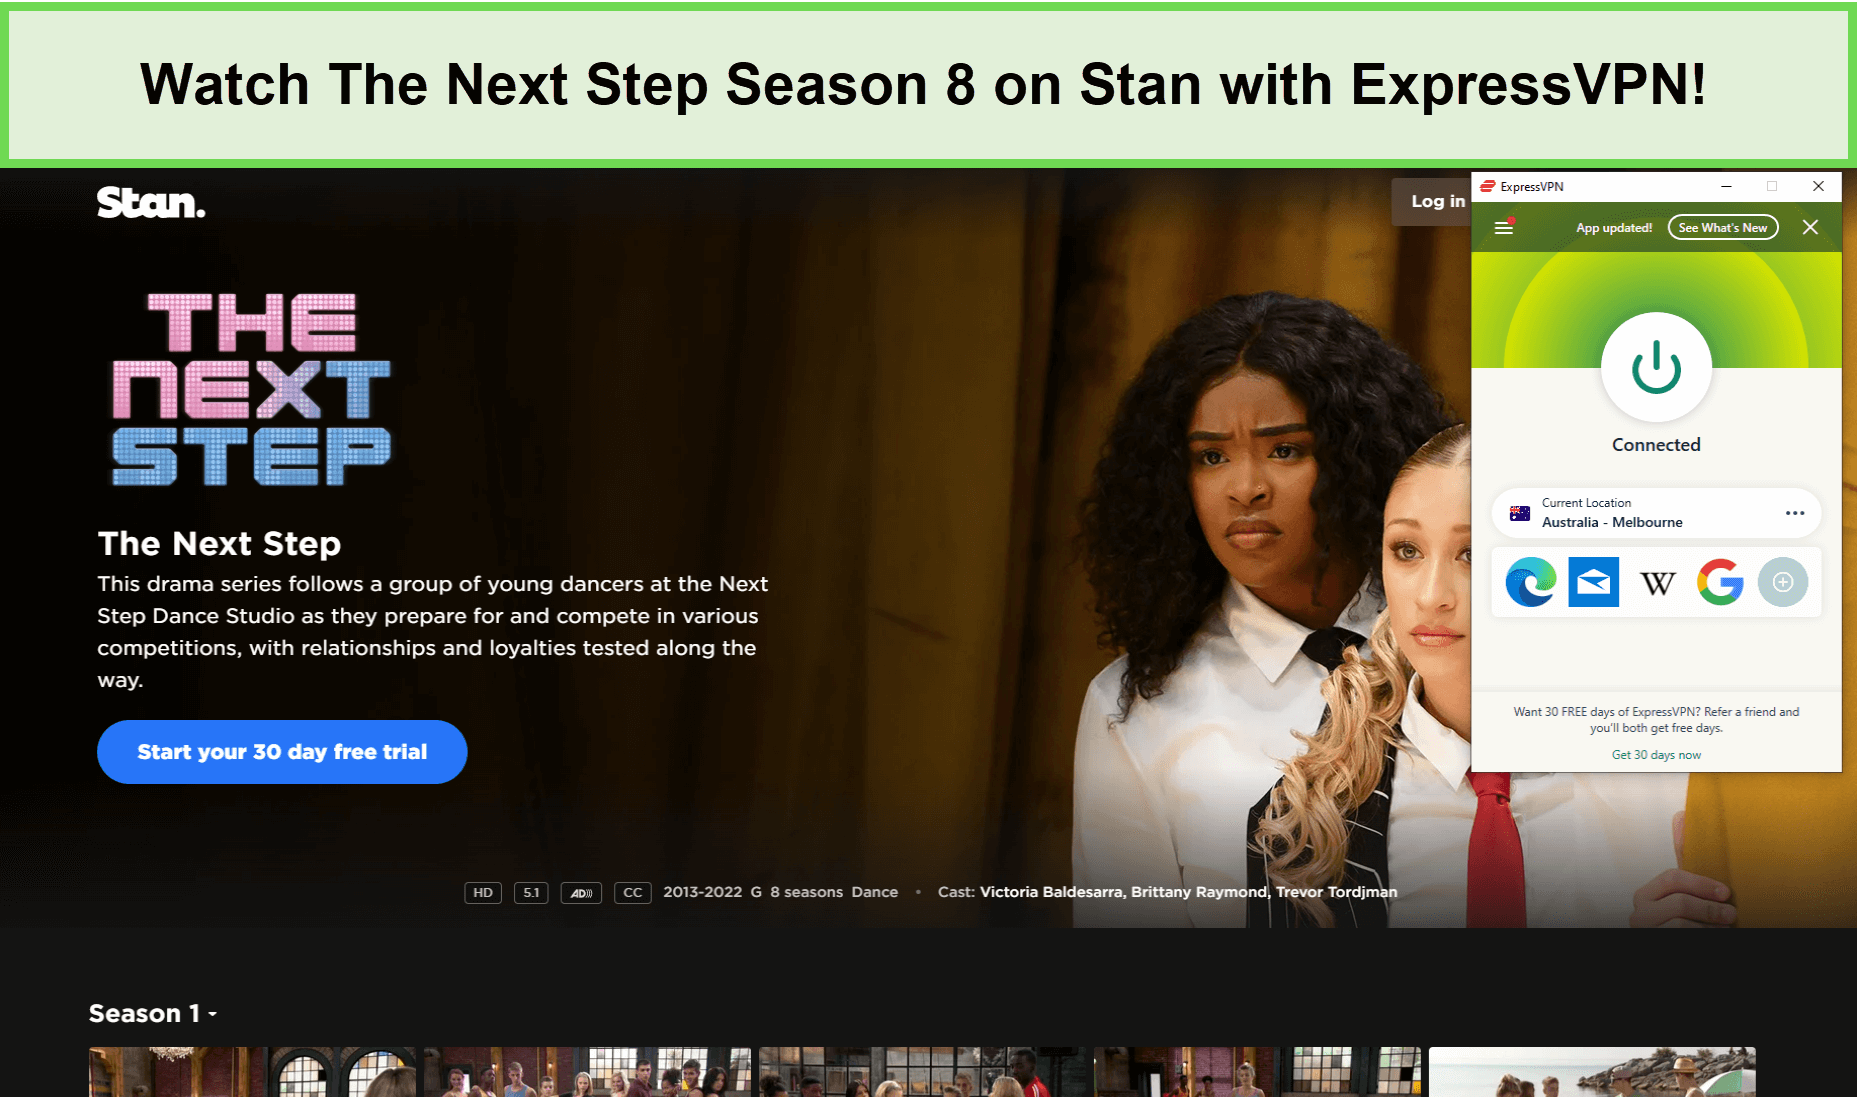 Watch-The-Next-Step-Season-8-in-India-on-Stan-with-ExpressVPN